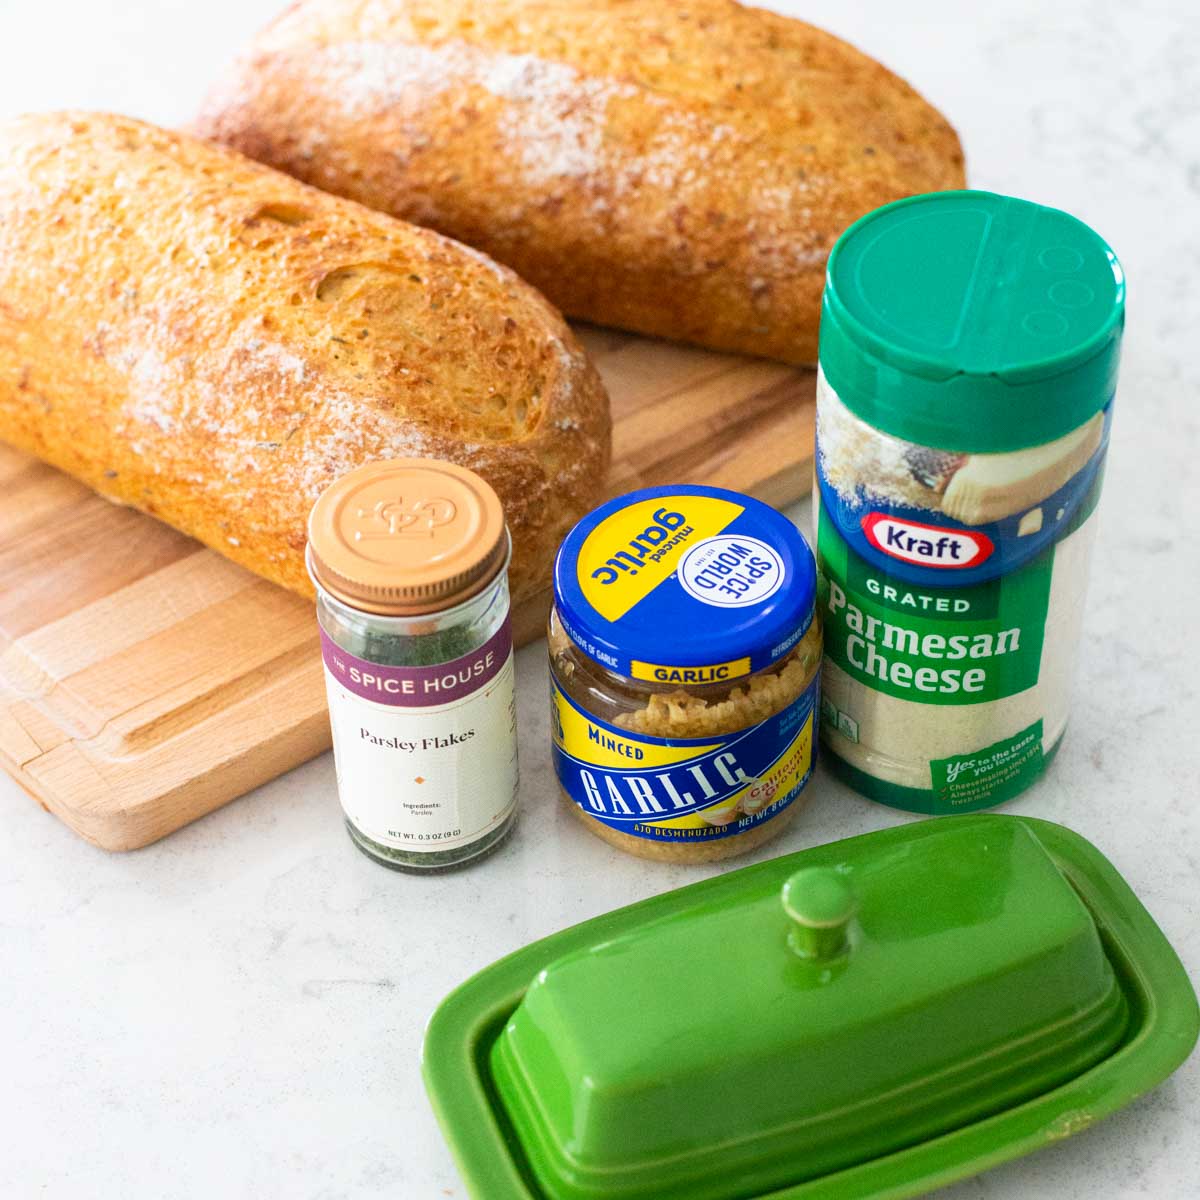 The ingredients for the homemade garlic bread are on the counter.